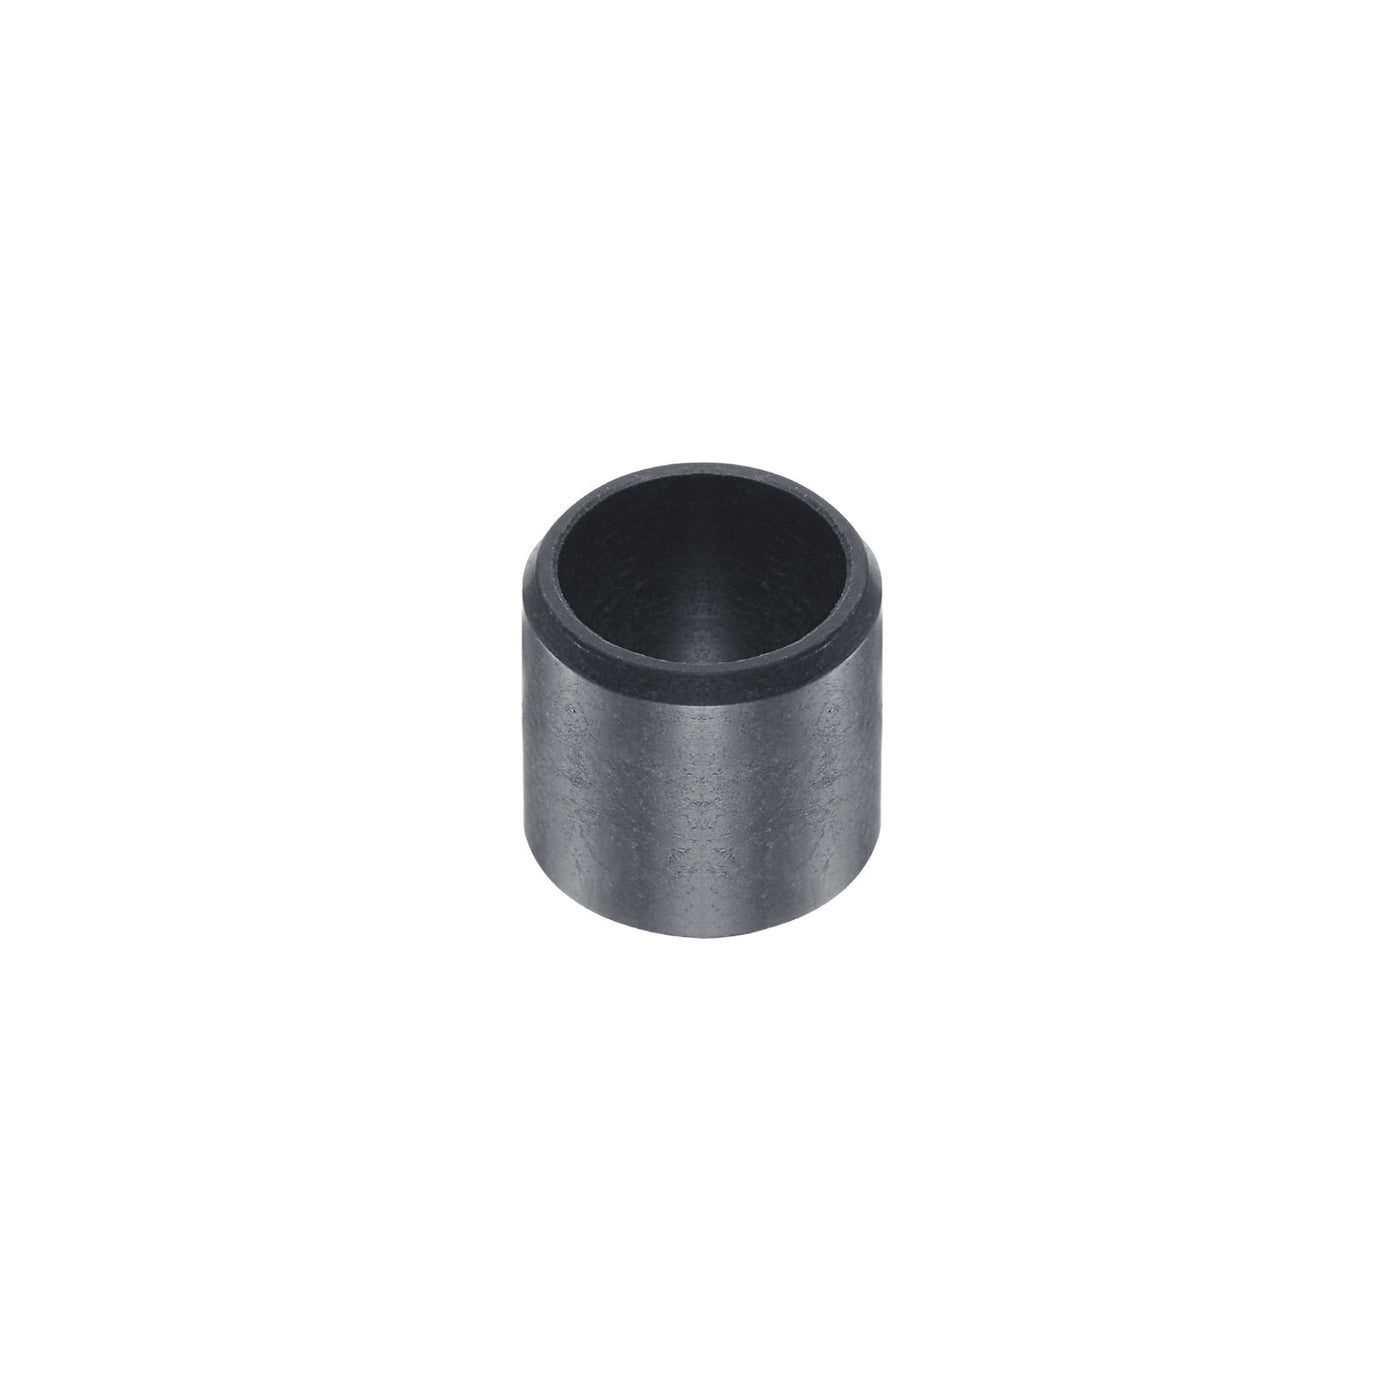 uxcell Uxcell Sleeve Bearings 8mmx10mmx8mm POM Wrapped Oilless Bushings Black